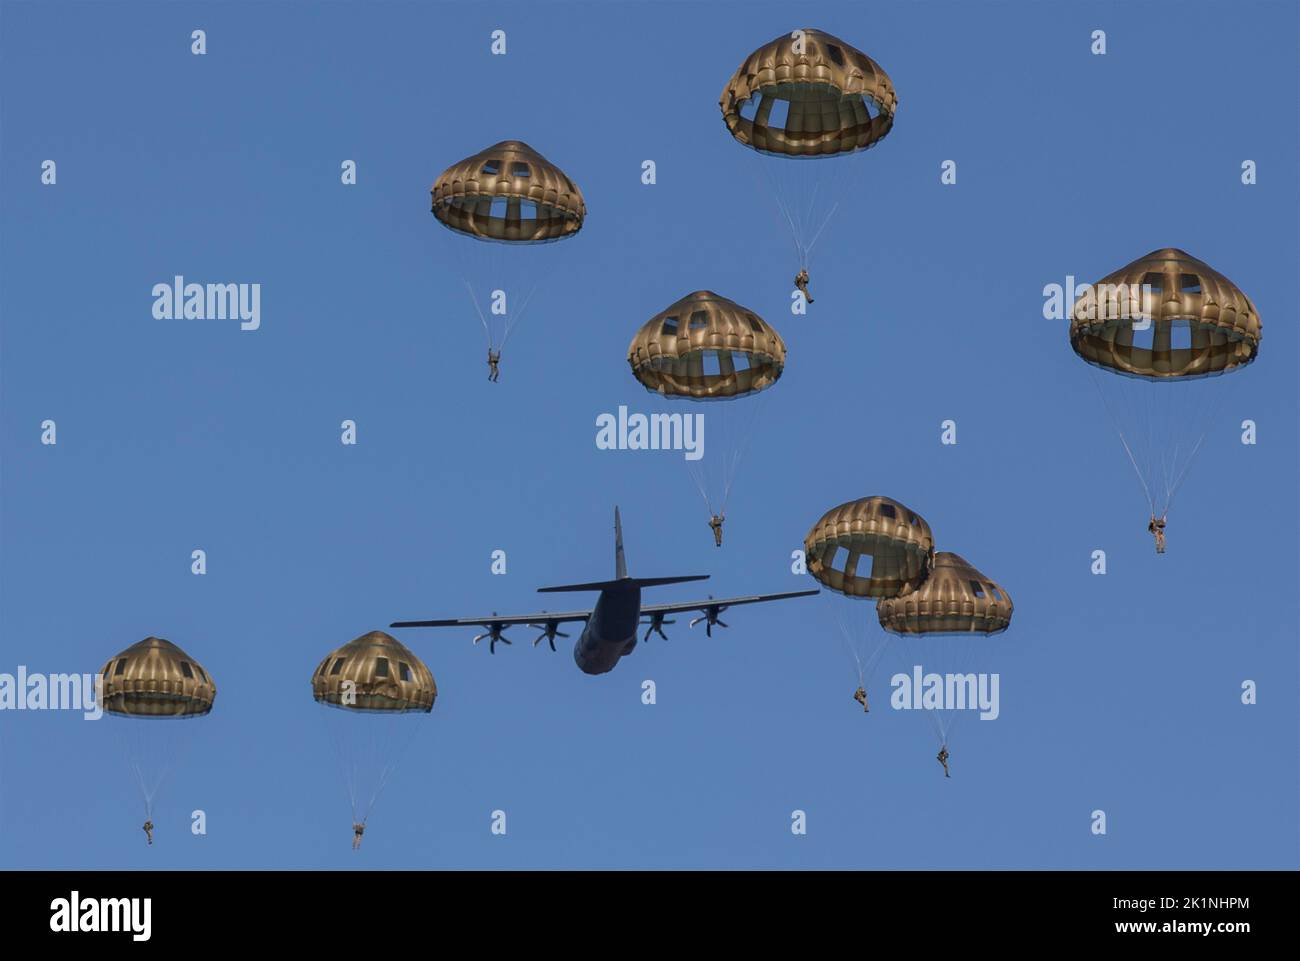 Arnhem, Netherlands. 17 September, 2022. U.S. Army and European Paratroopers descend onto the Drop Zone from a U.S. Air Force C-130 aircraft during Exercise Falcon Leap at Ginkelse Heide Drop Zone, September 17, 2022 in Arnhem, Netherlands. More than 1000 Paratroopers from 13 nations are taking part in the two week NATO exercise.  Credit: S1C Austin Berner/U.S. Army Photo/Alamy Live News Stock Photo